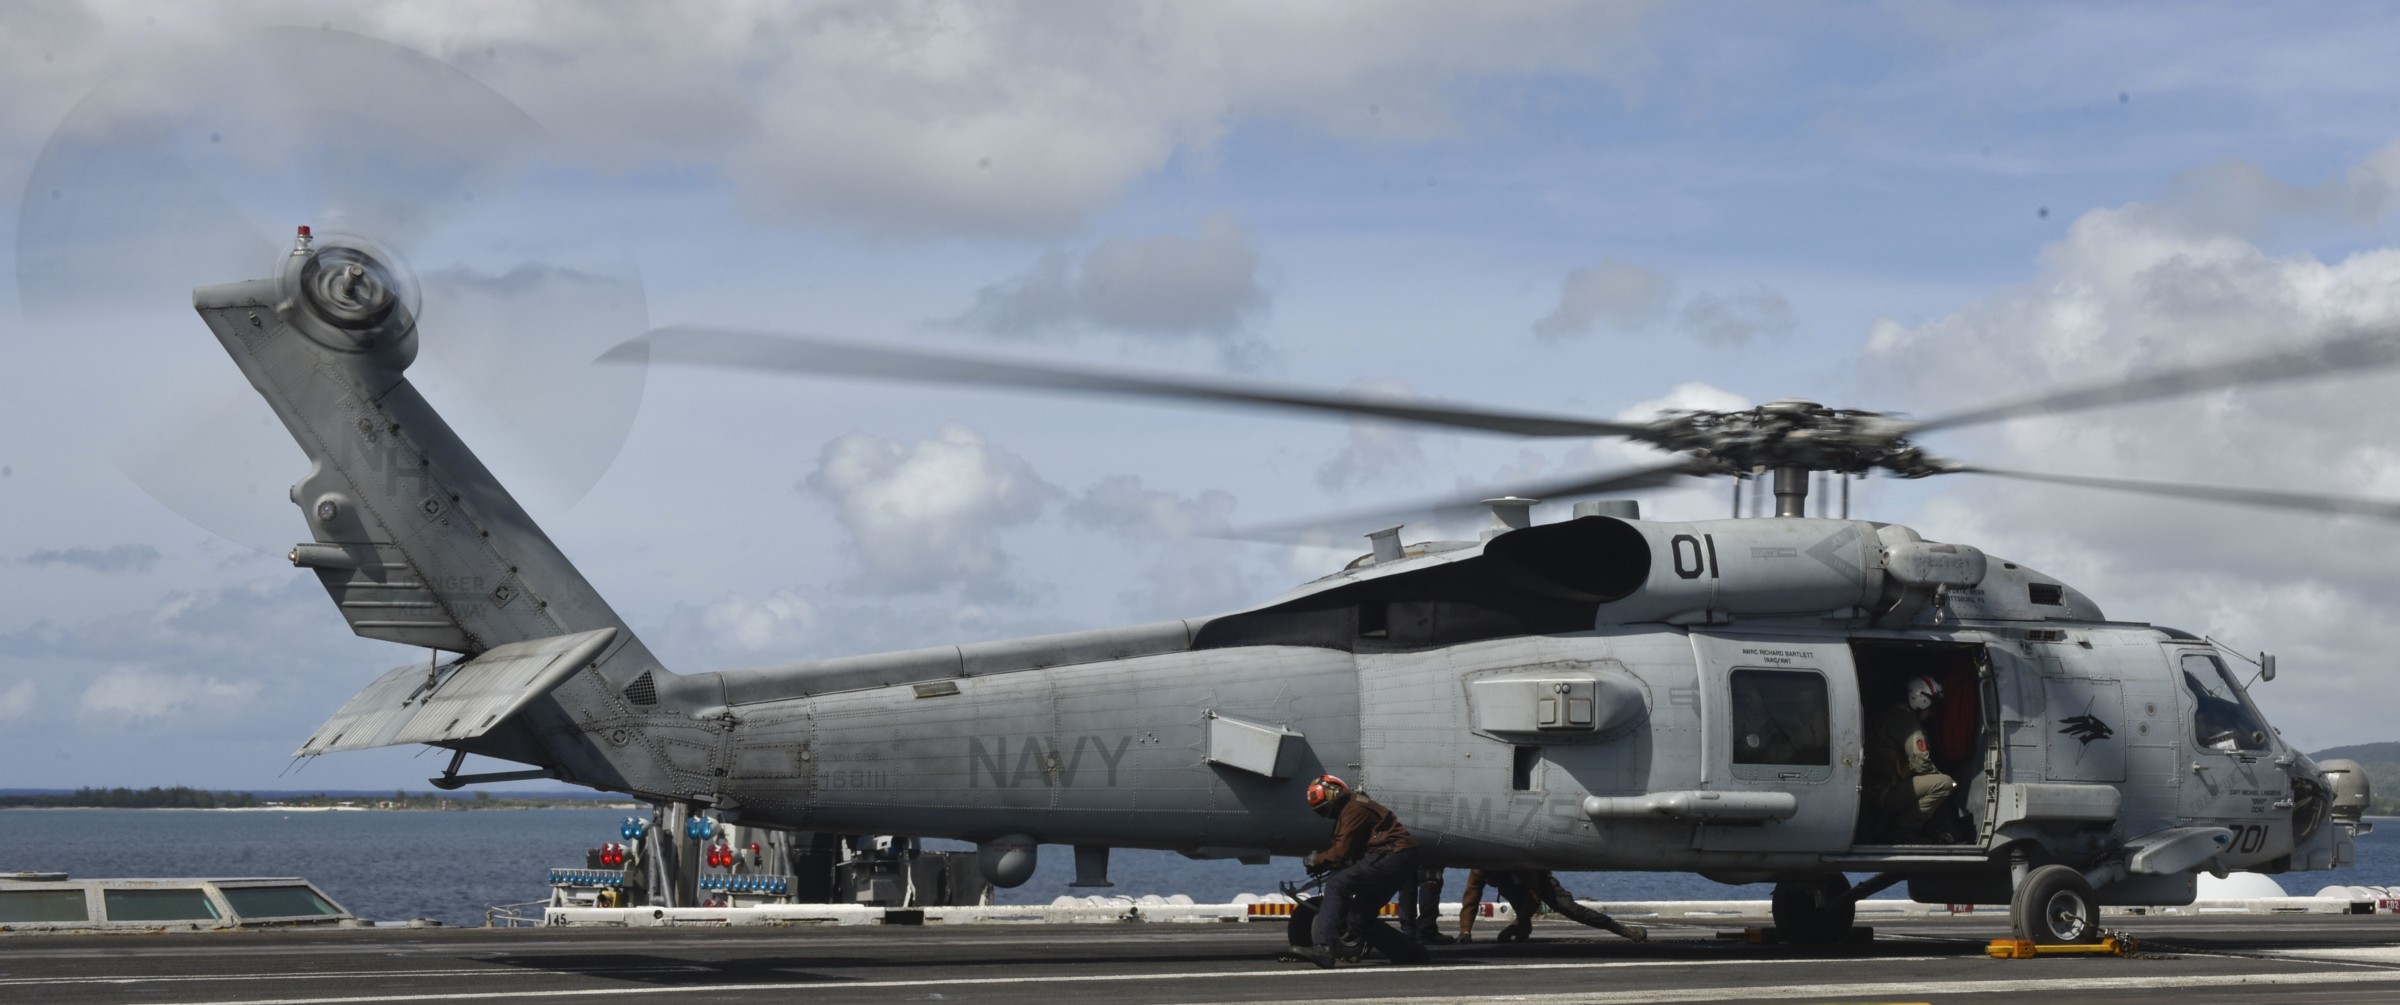 hsm-75 wolf pack helicopter maritime strike squadron mh-60r seahawk cvw-11 cvn-71 uss theodore roosevelt 2020 82